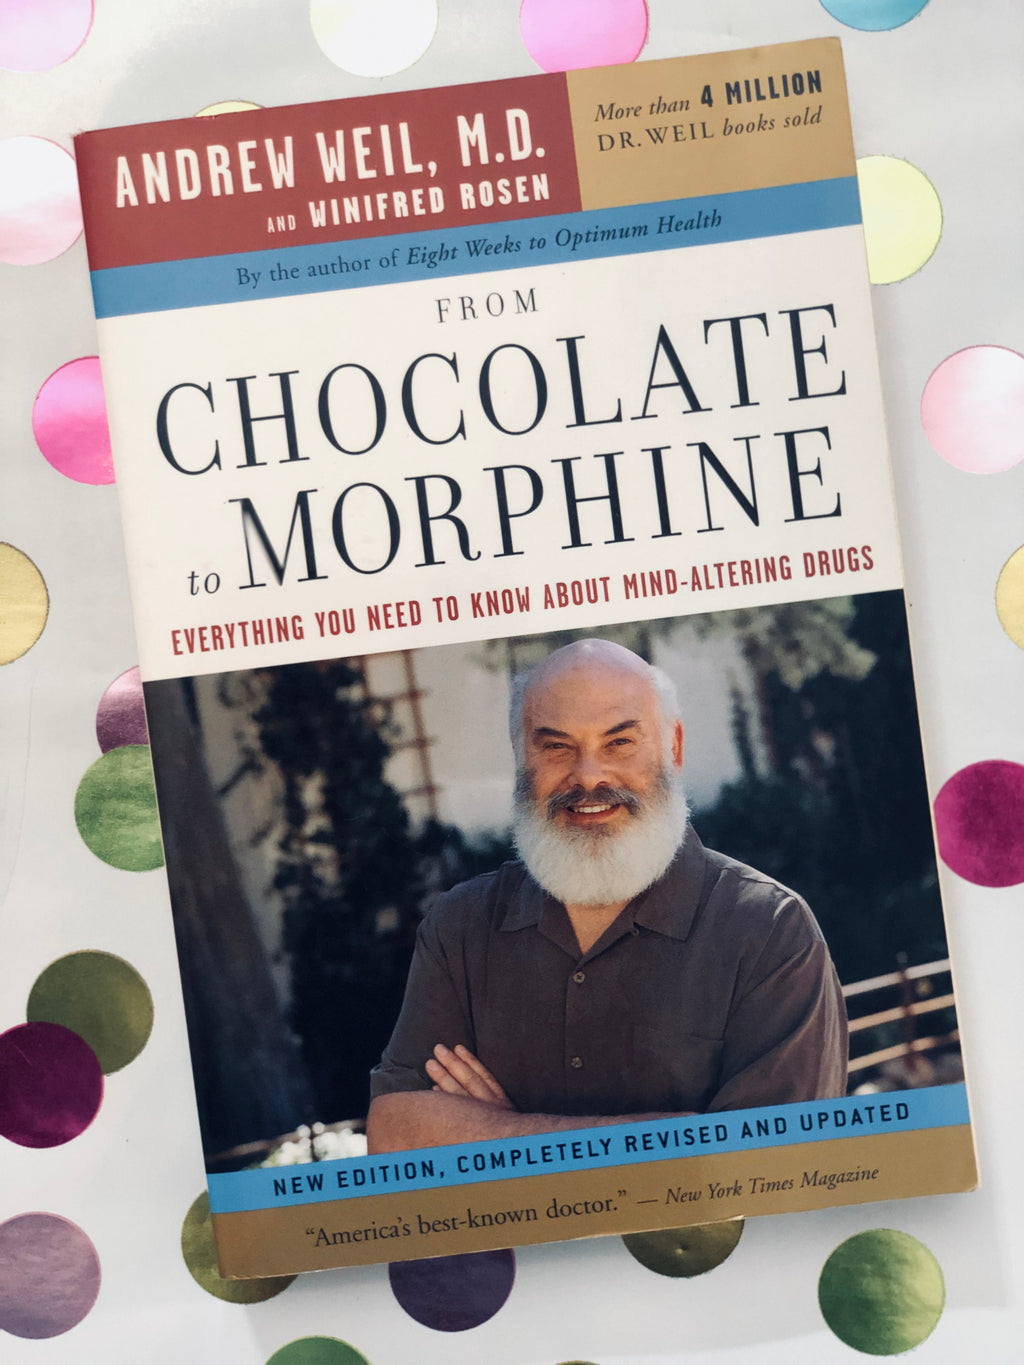 From Chocolate to Morphine- By Andrew Weil, M.D & Winifred Rosen